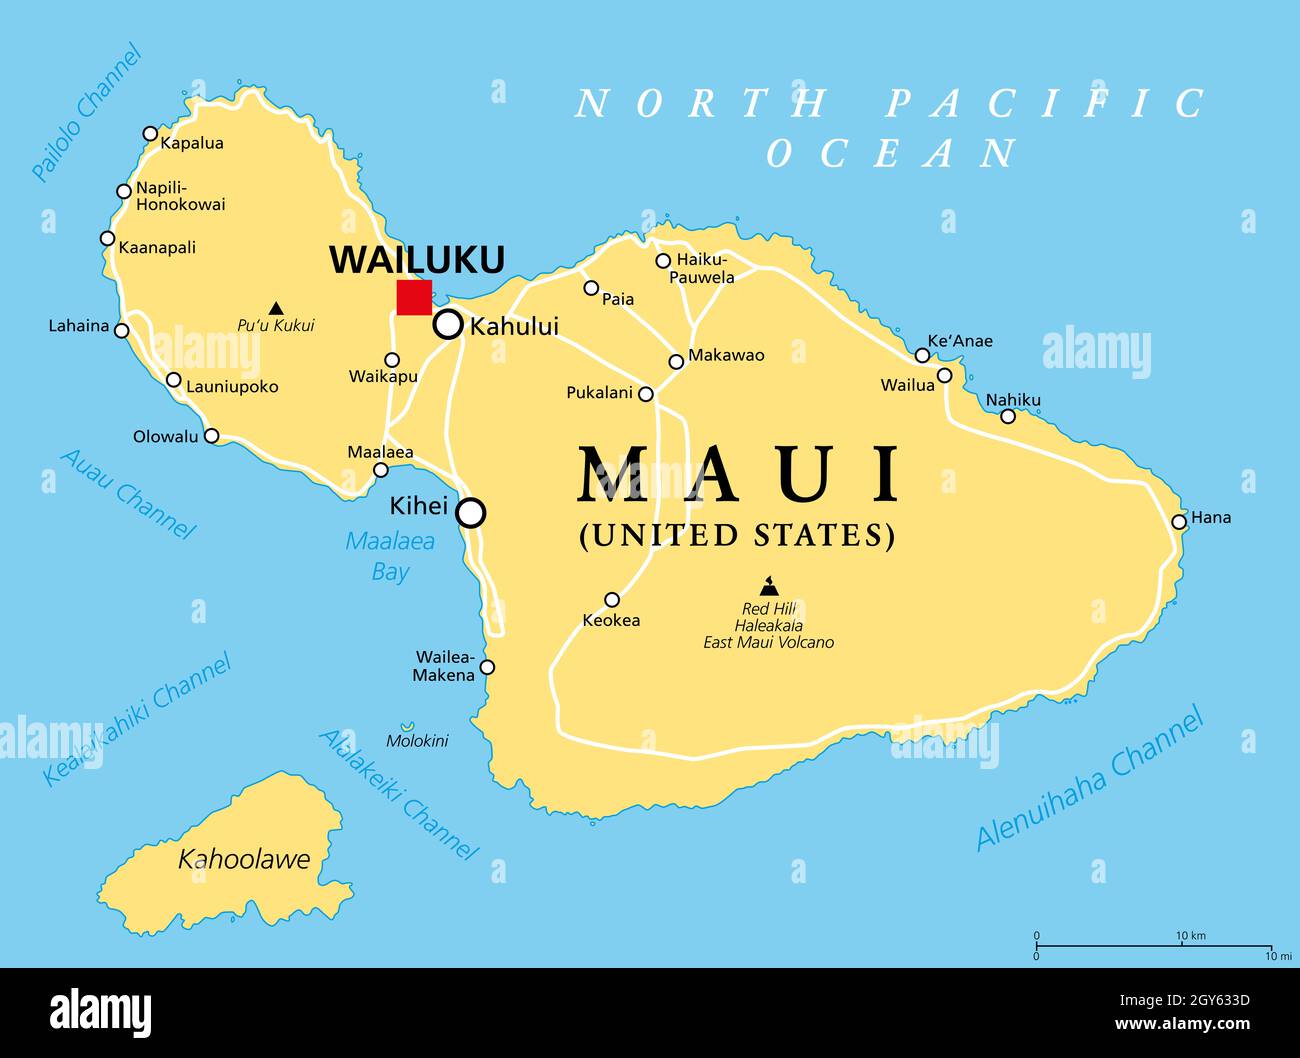 Maui, Hawaii, political map with capital Wailuku. Part of Hawaiian Islands and Hawaii, a state of the United States in the North Pacific Ocean. Stock Photo